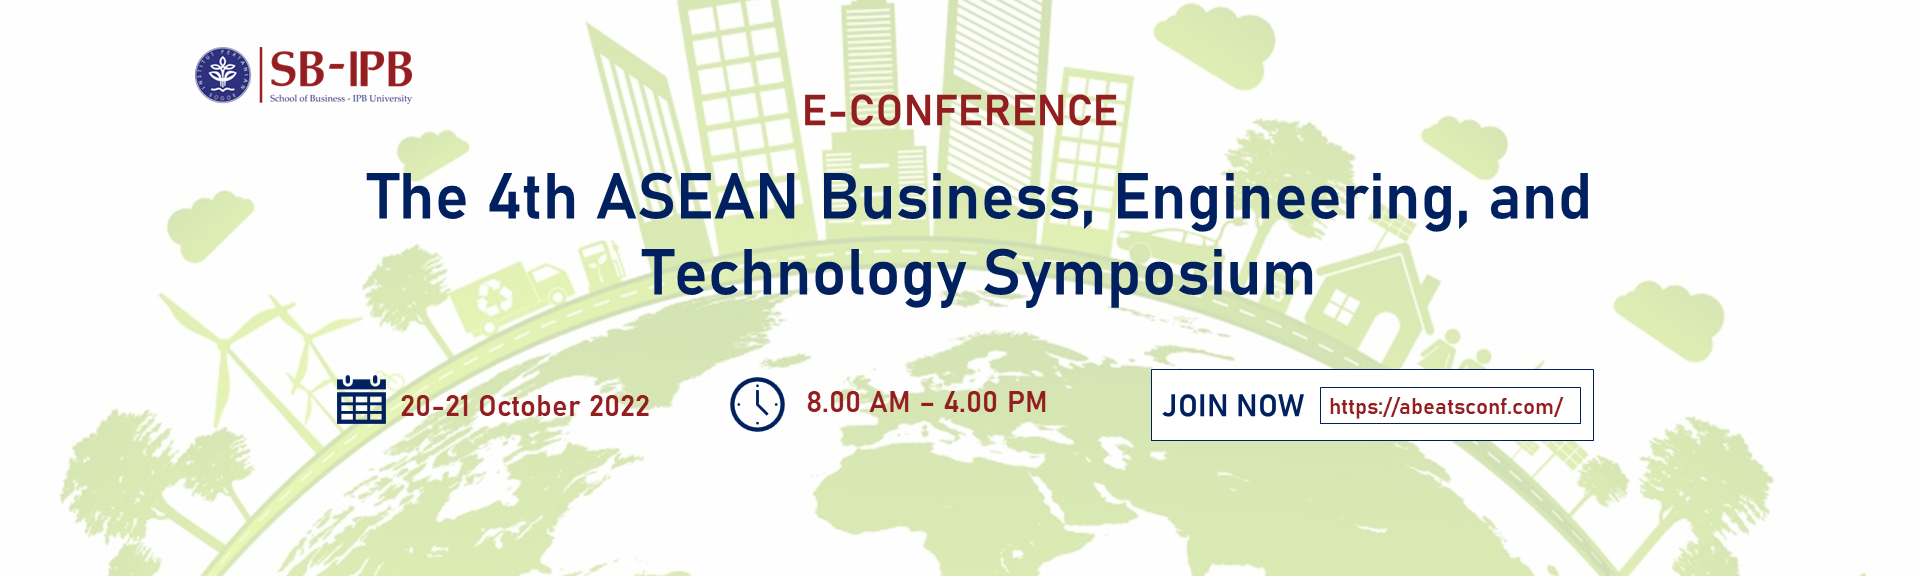 The 4th ASEAN Business, Engineering, and Technology Symposium